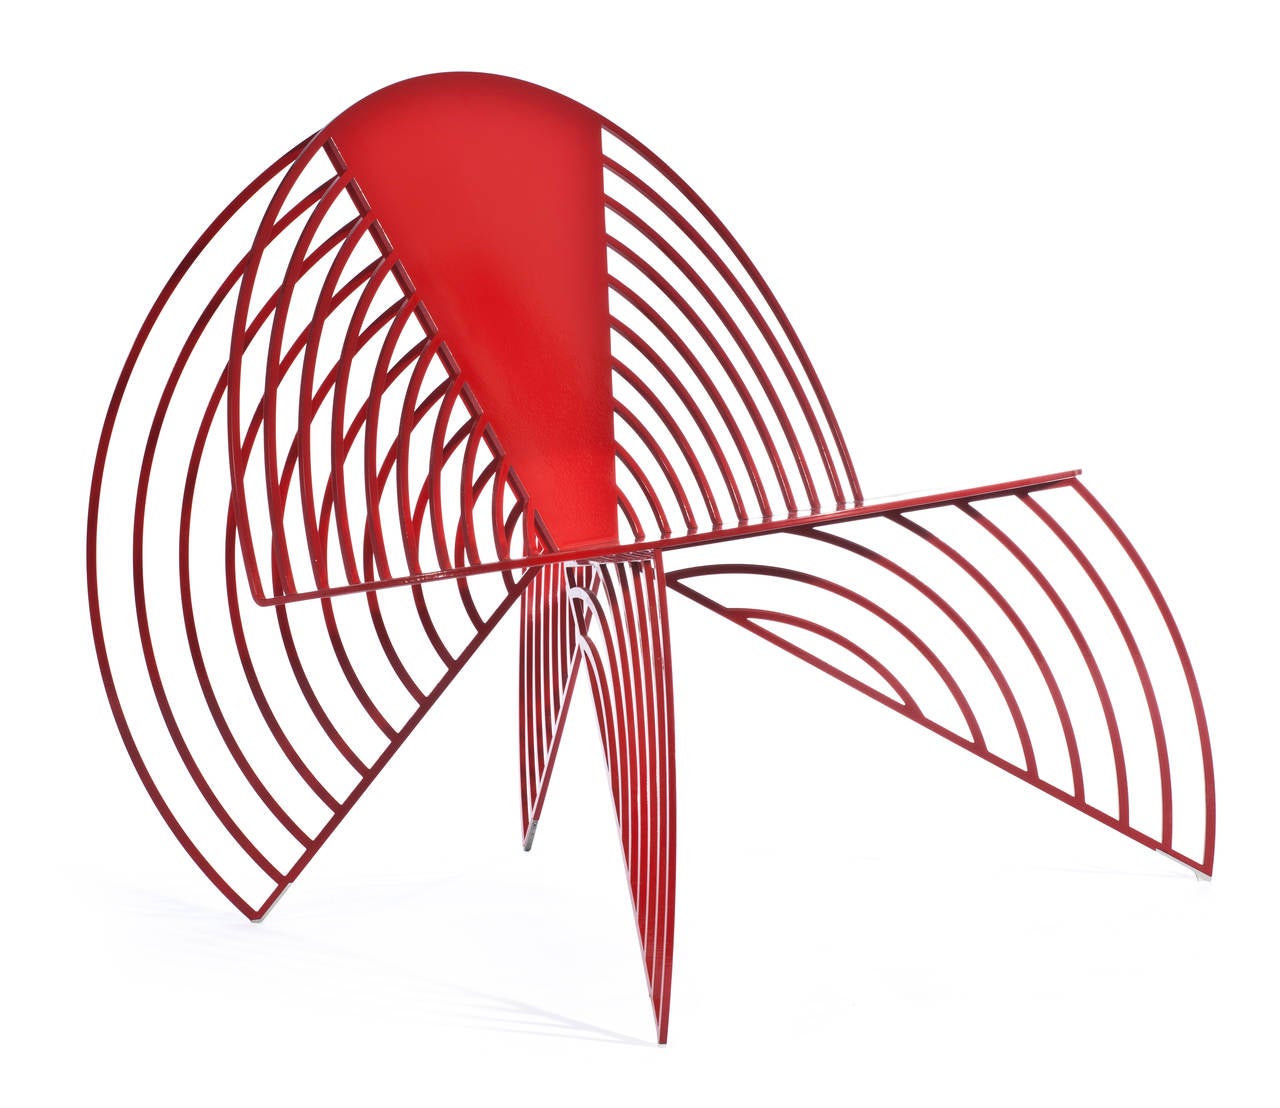 The wings of steel chair is fabricated from laser cut steel and powder coated in a variety of durable colors for outdoor and indoor use.

While the material is strong, the form is light as a butterfly about to take flight. Its laser cut strips